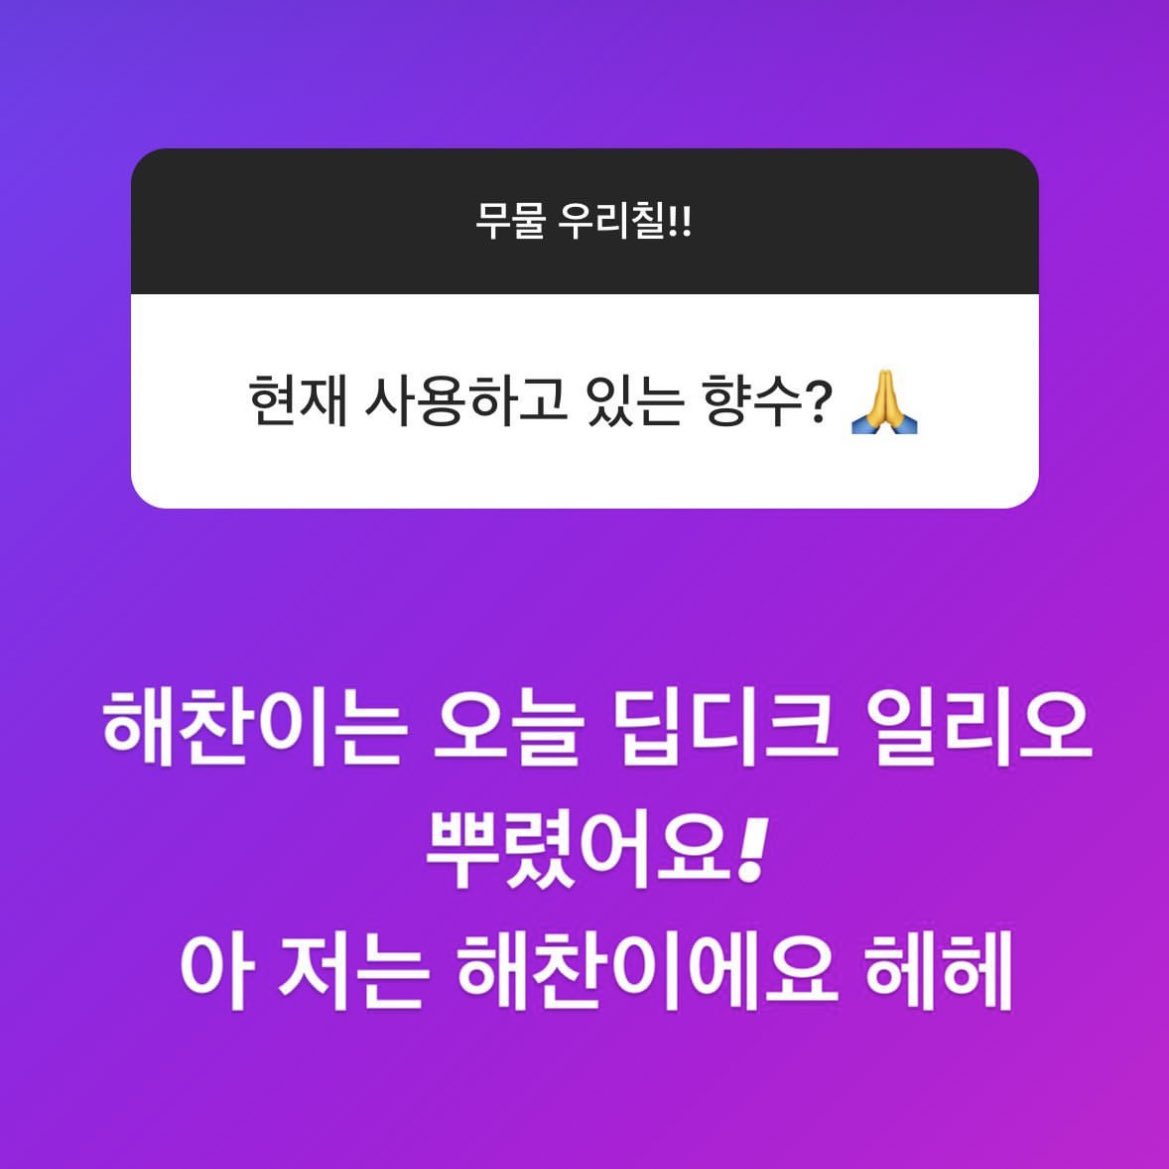 230630 nct127 Instagram Story AMA #HAECHAN

Q. What is our Haechannie doing right now~~?
🐰 Haechannie ate together with me just now hhh

Q. Perfume you’re using as of now? 🙏
🐻 Haechannie’s wearing Diptyque Ilio today! Ah i’m Haechan hehe (*his turn to do ama)